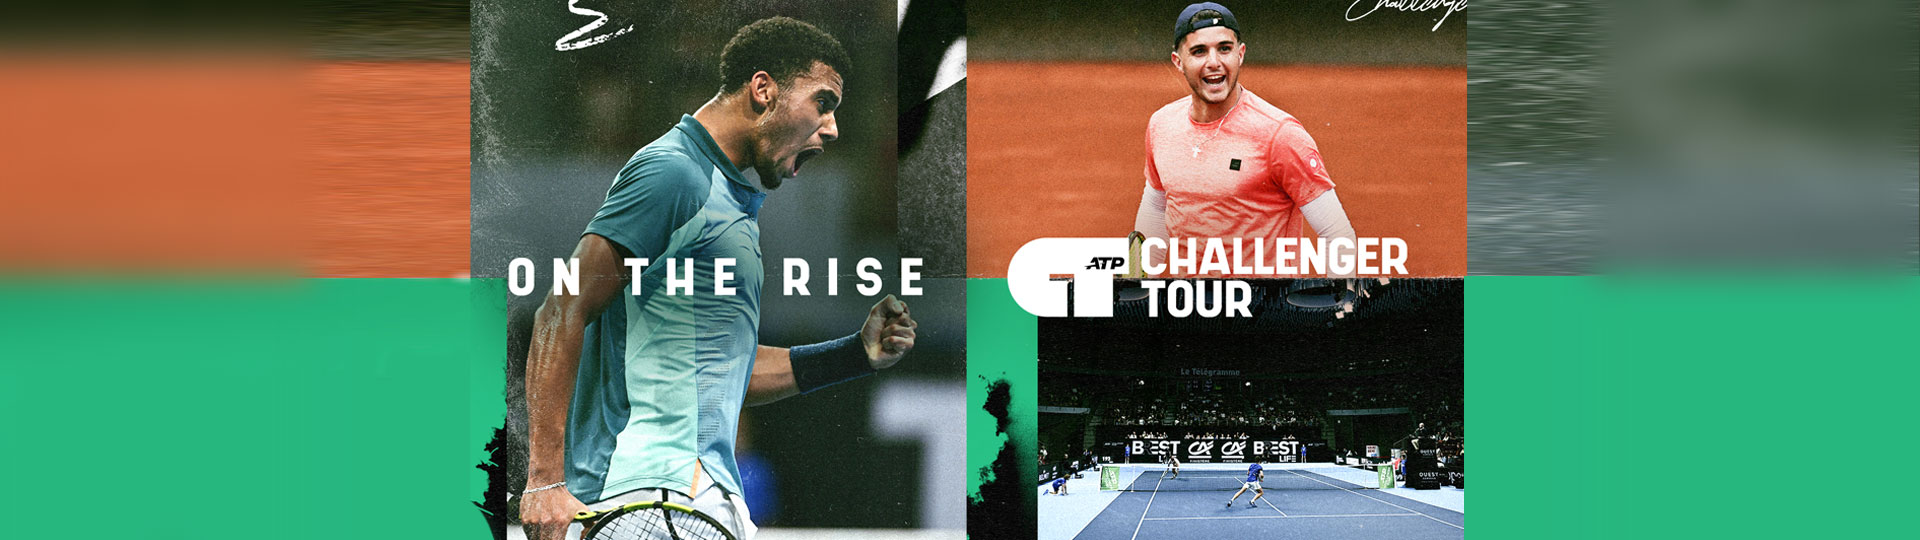 Challenger Tour - On the Rise